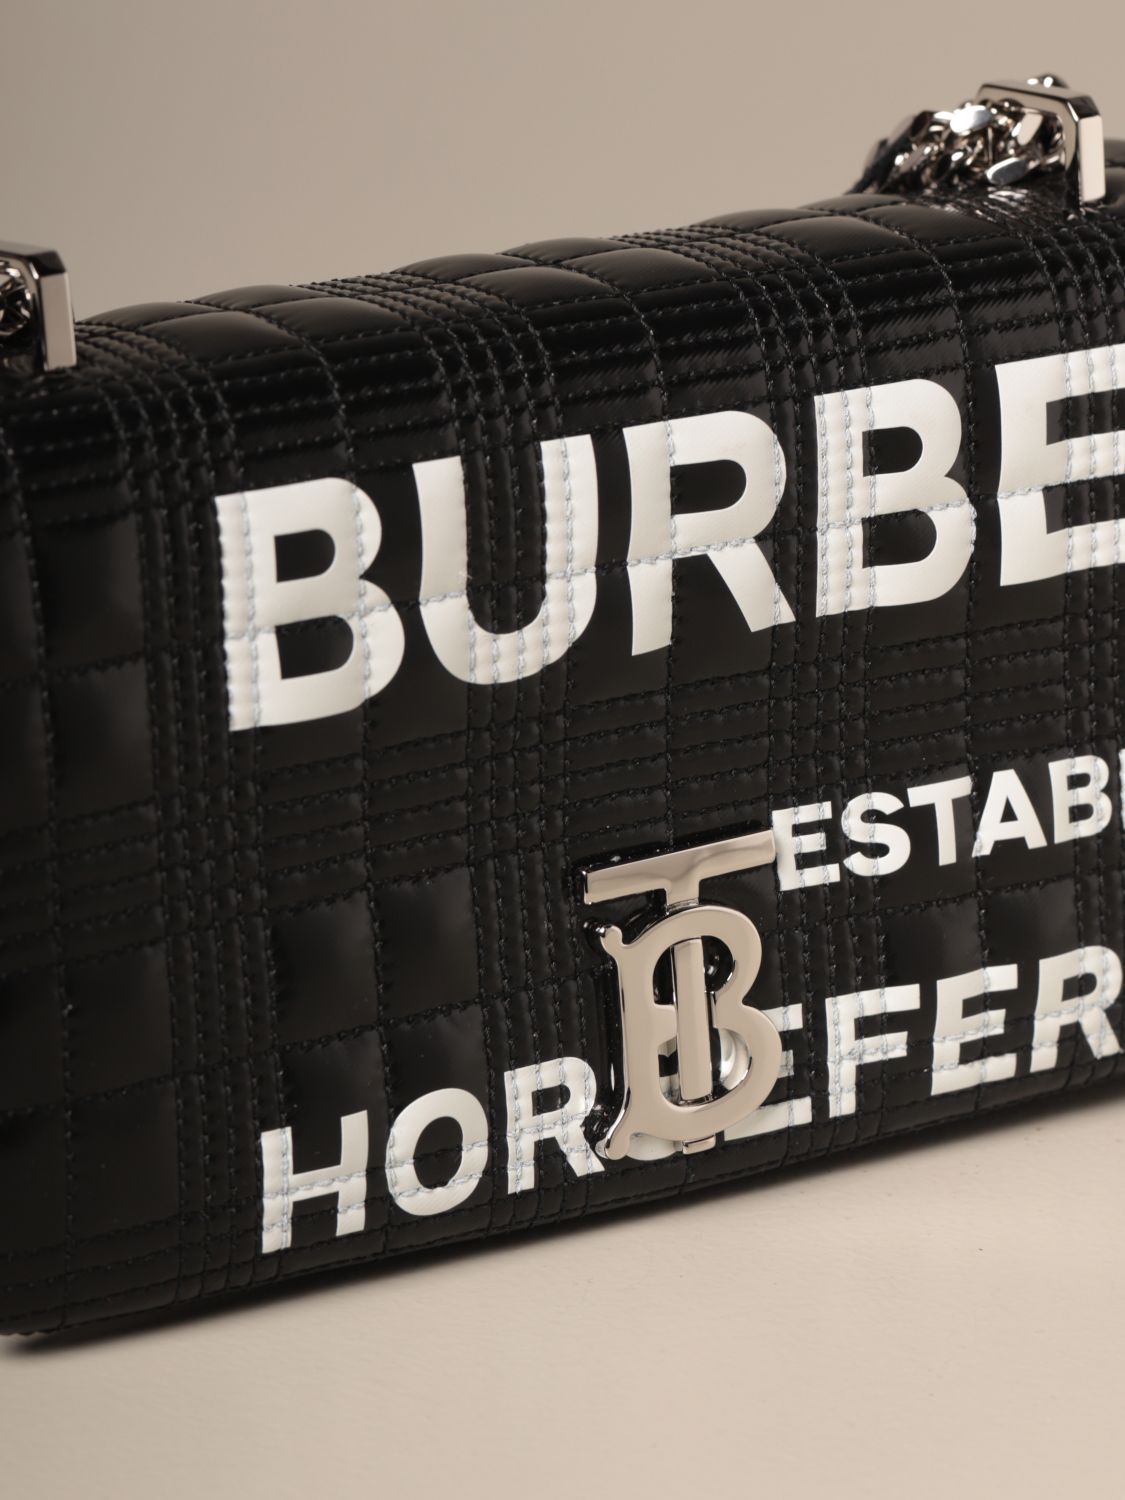 Burberry Horseferry Print Quilted Lola Belt Bag in Black